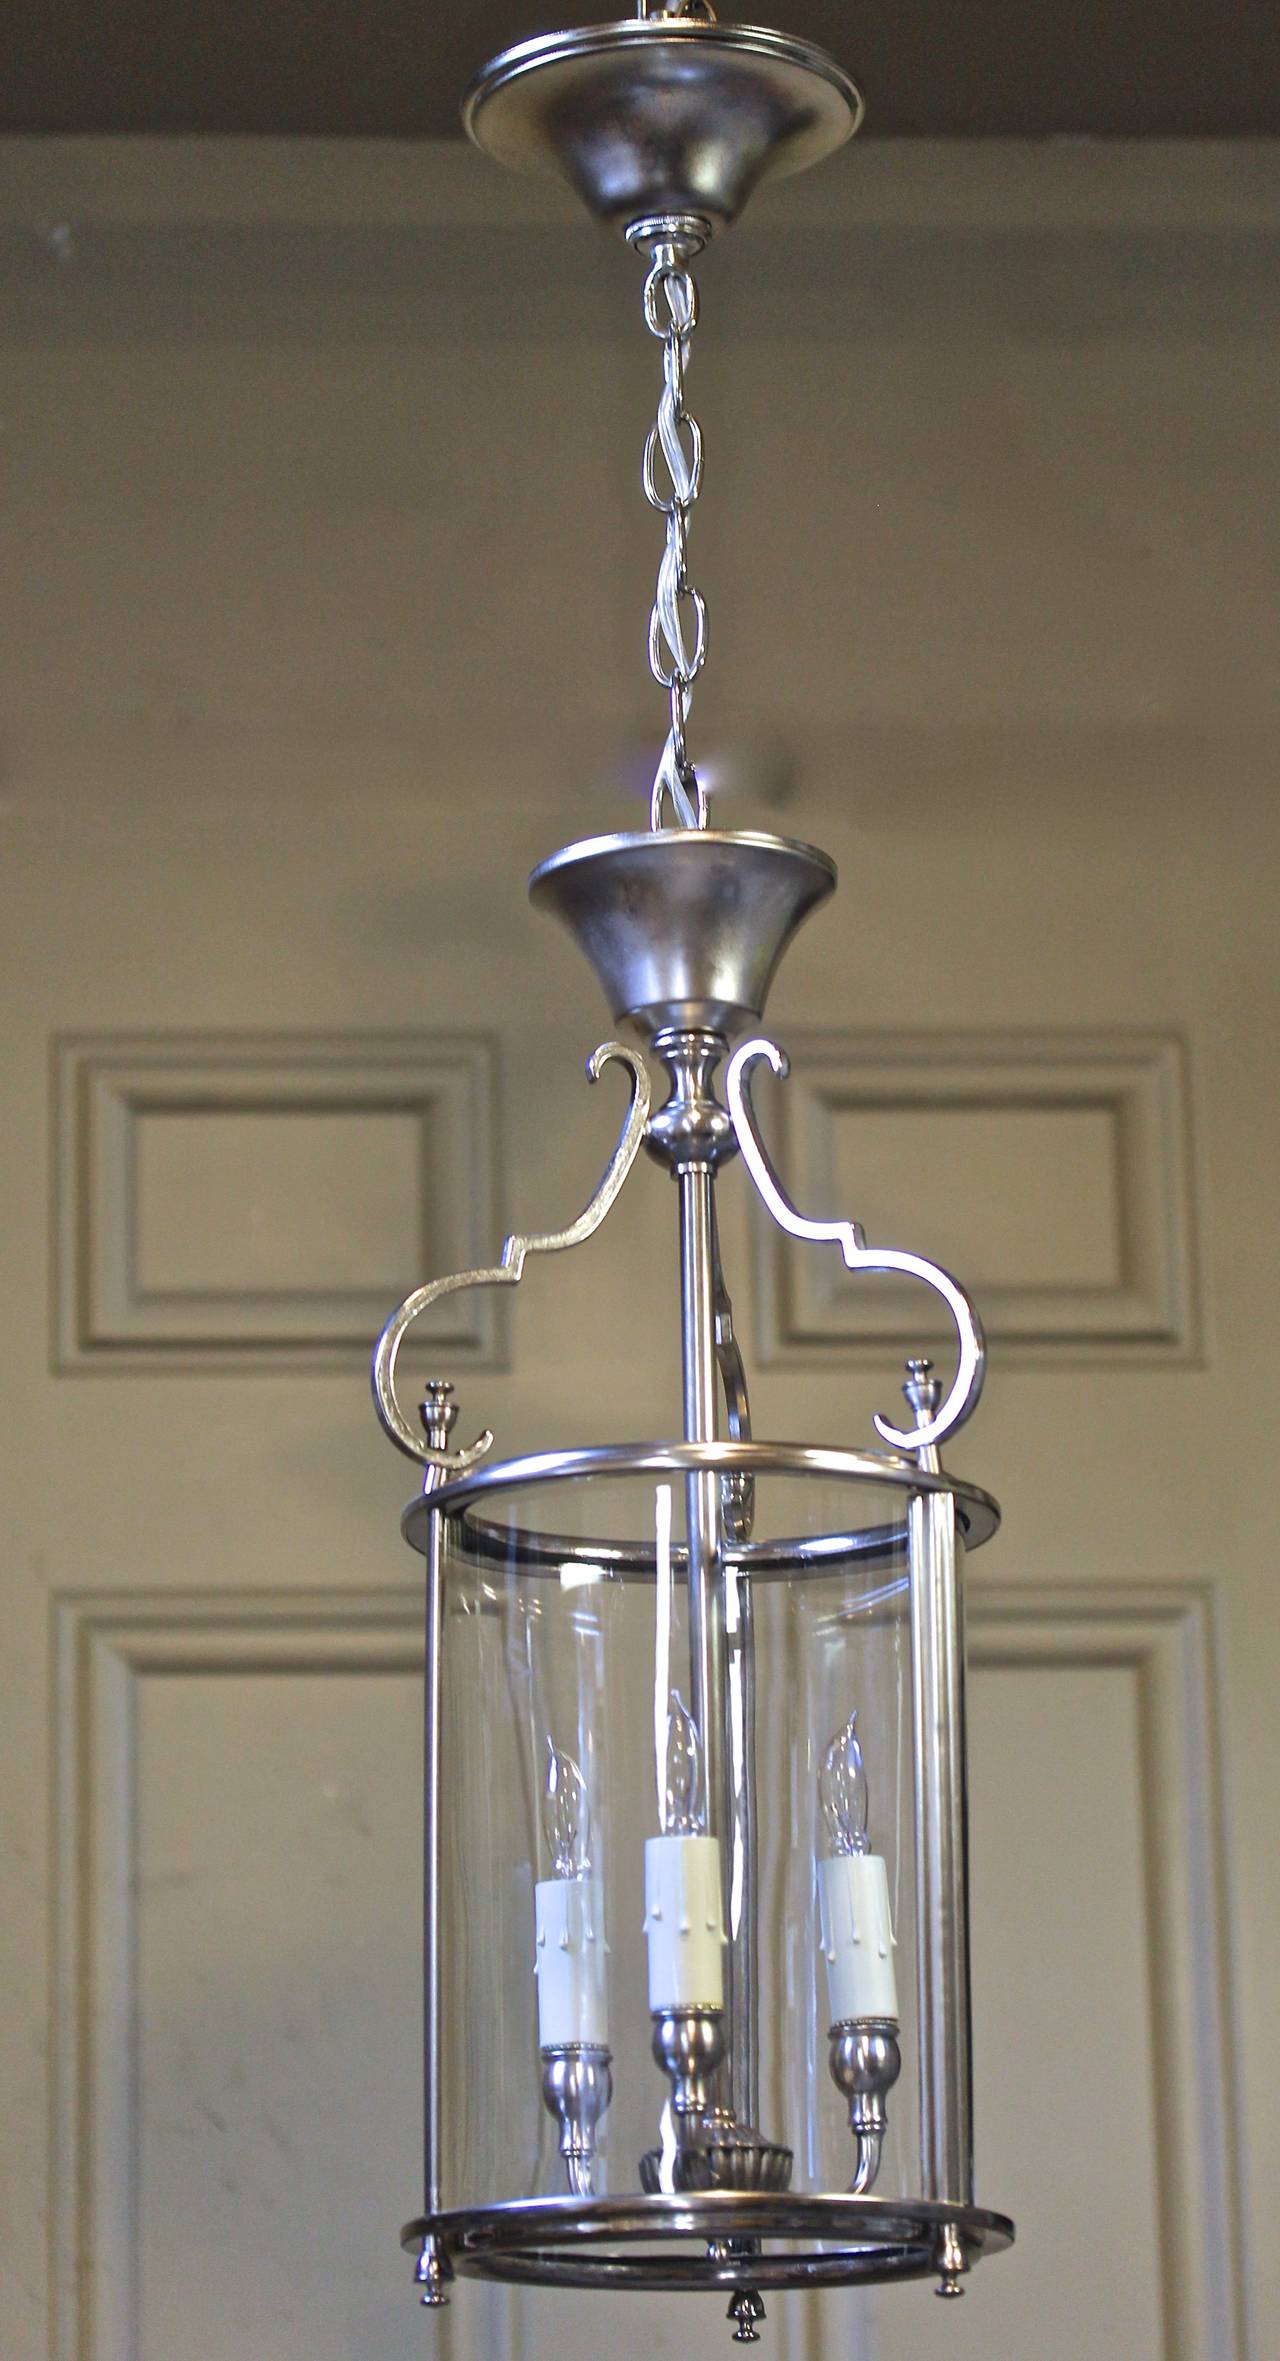 Italian brass Neoclassic solid brass hall lantern in silver plated finish with a single cylindrical glass shade and 3 lights. Uses 3 - 40 watt max candelabra base bulbs, newly wired. Fixture 8